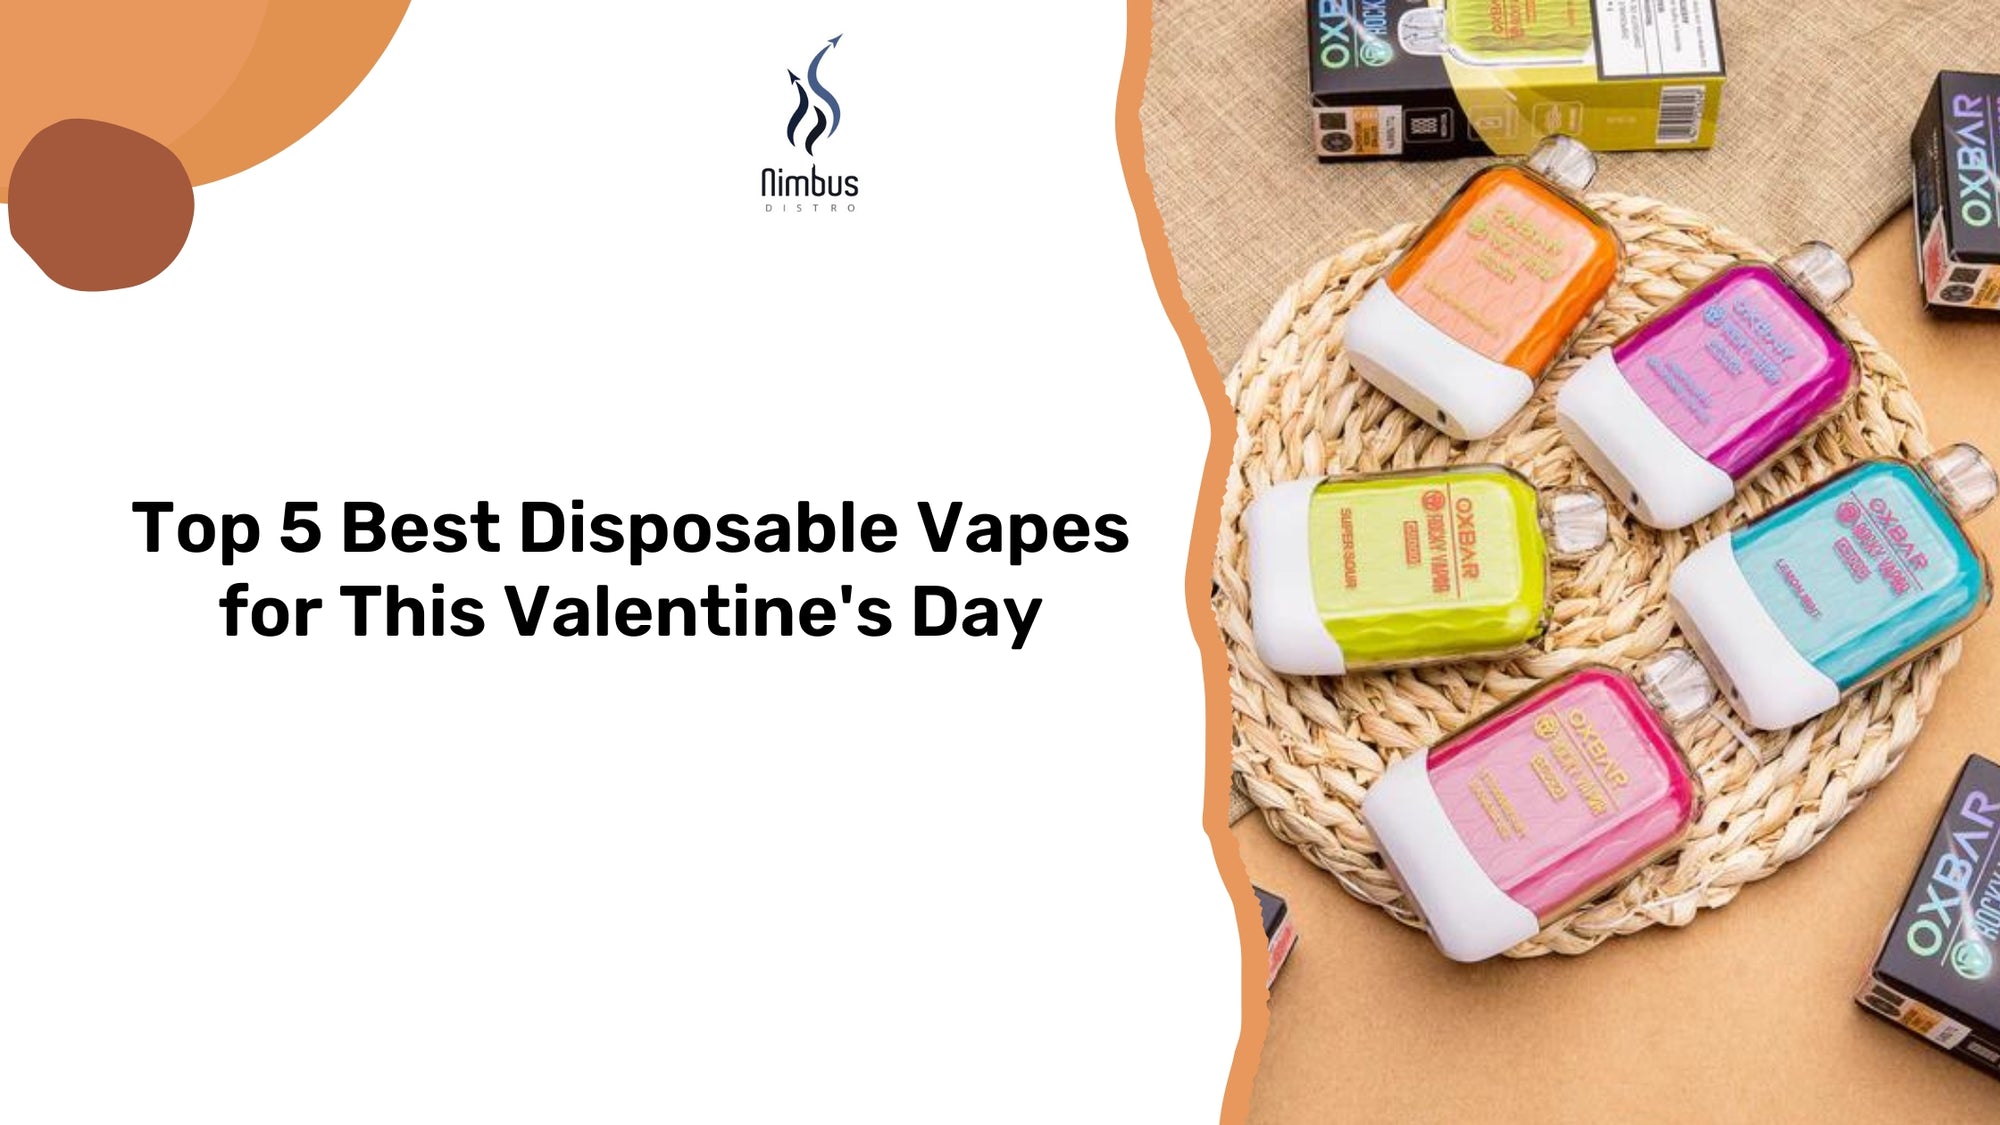 Top 5 Best Disposable Vapes for This Valentine's Day